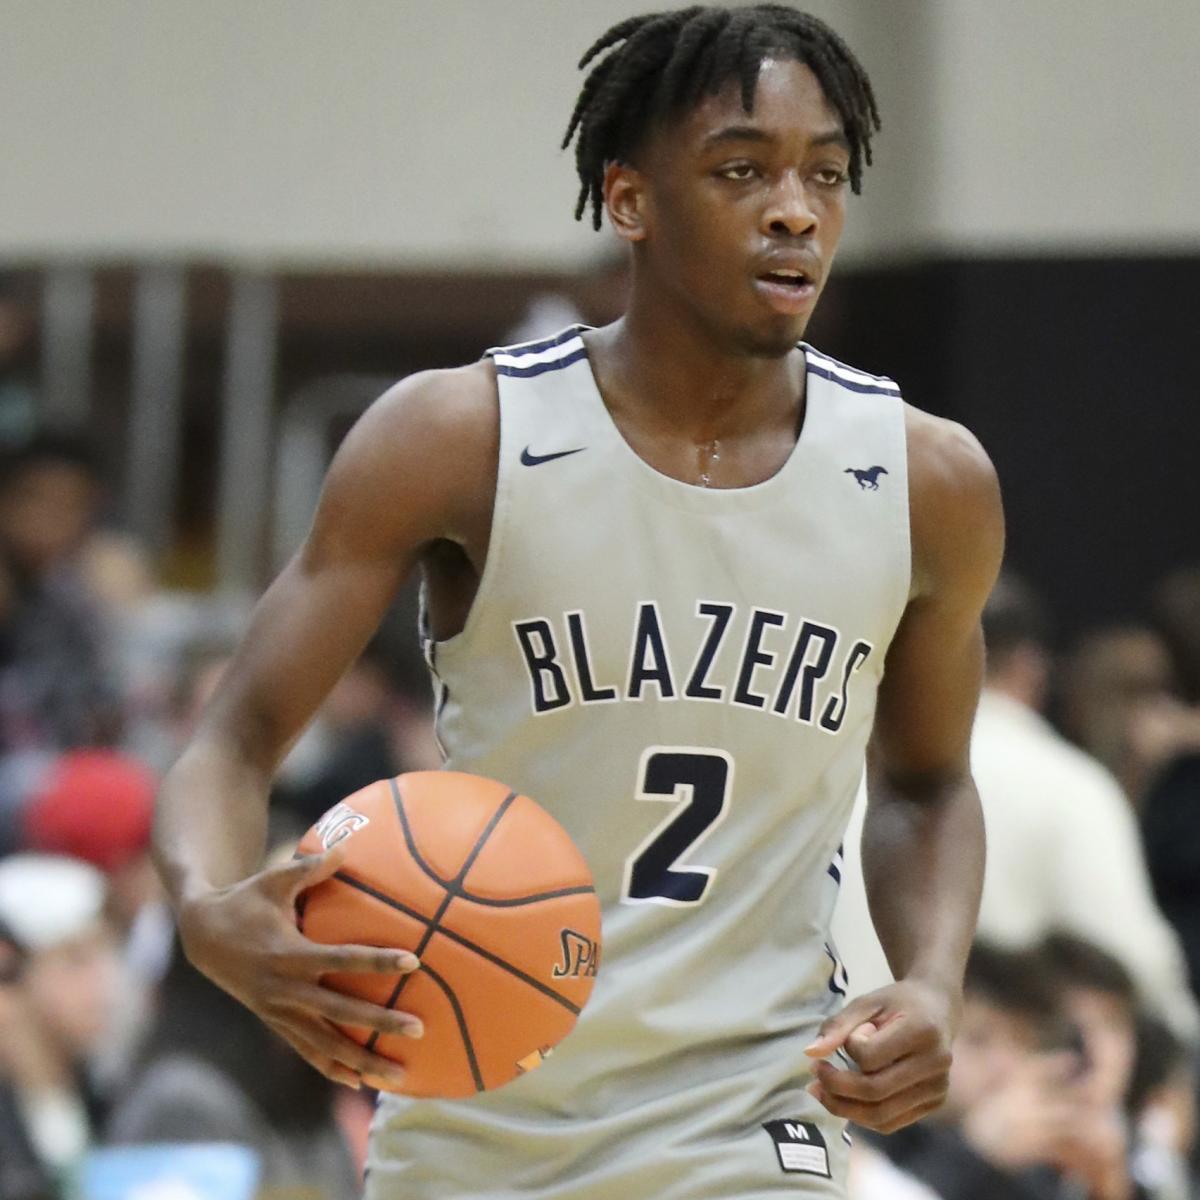 Dwyane Wade's Son Zaire to Join Brewster Academy After Sierra